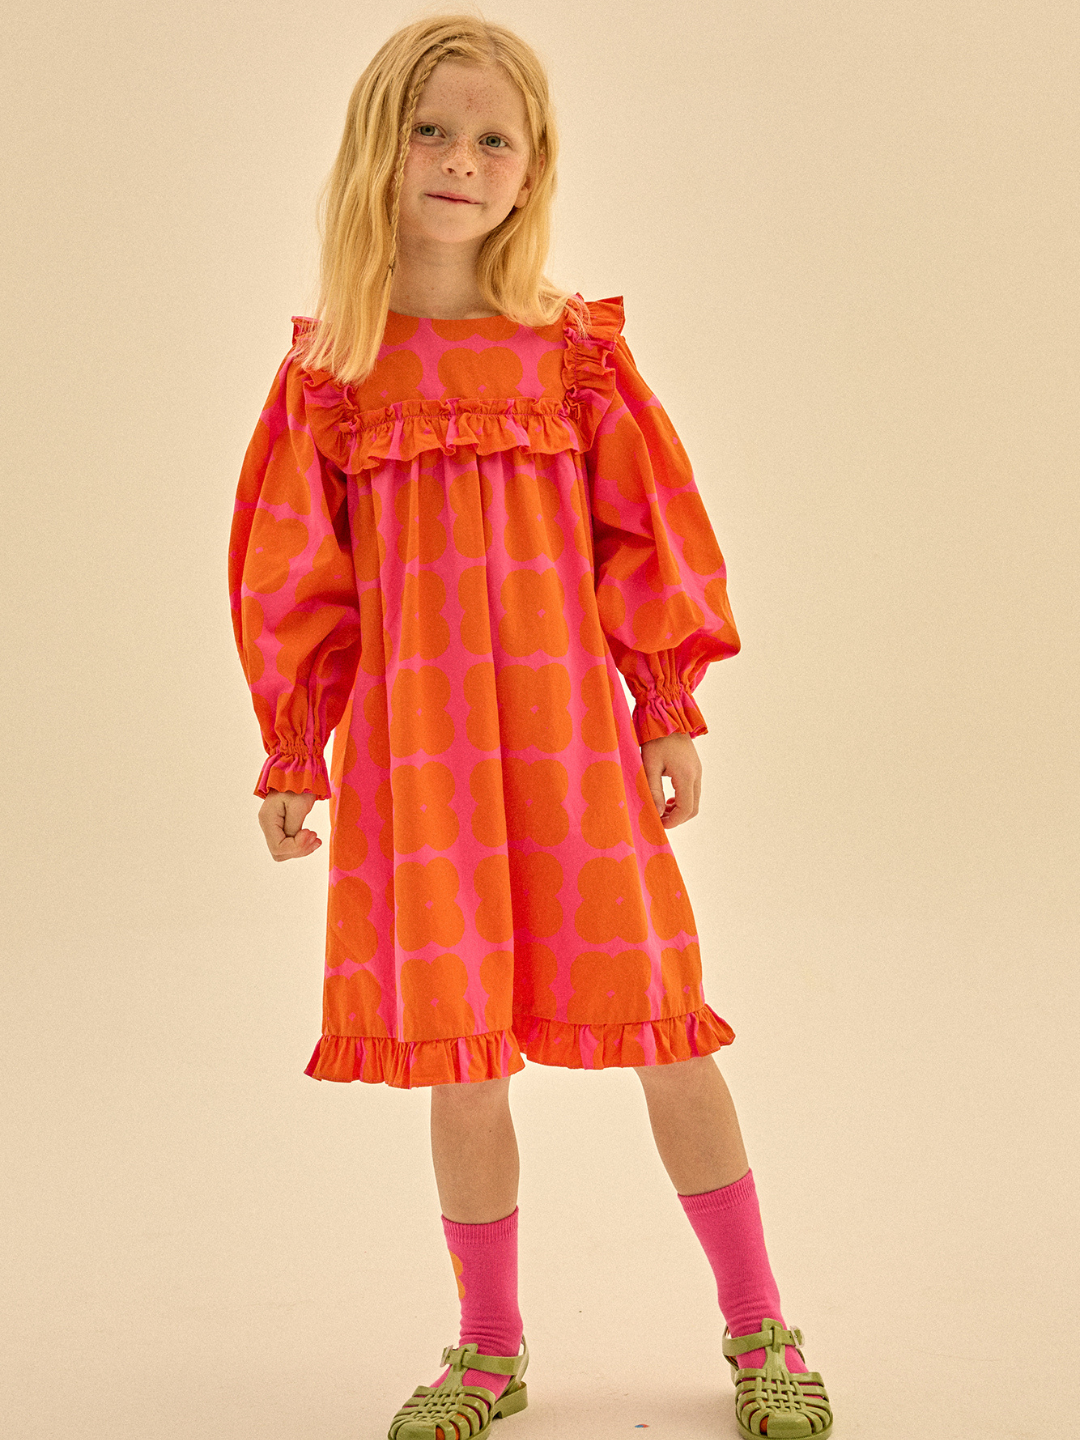 Child wearing Clover dress with bright pink socks and green sandals